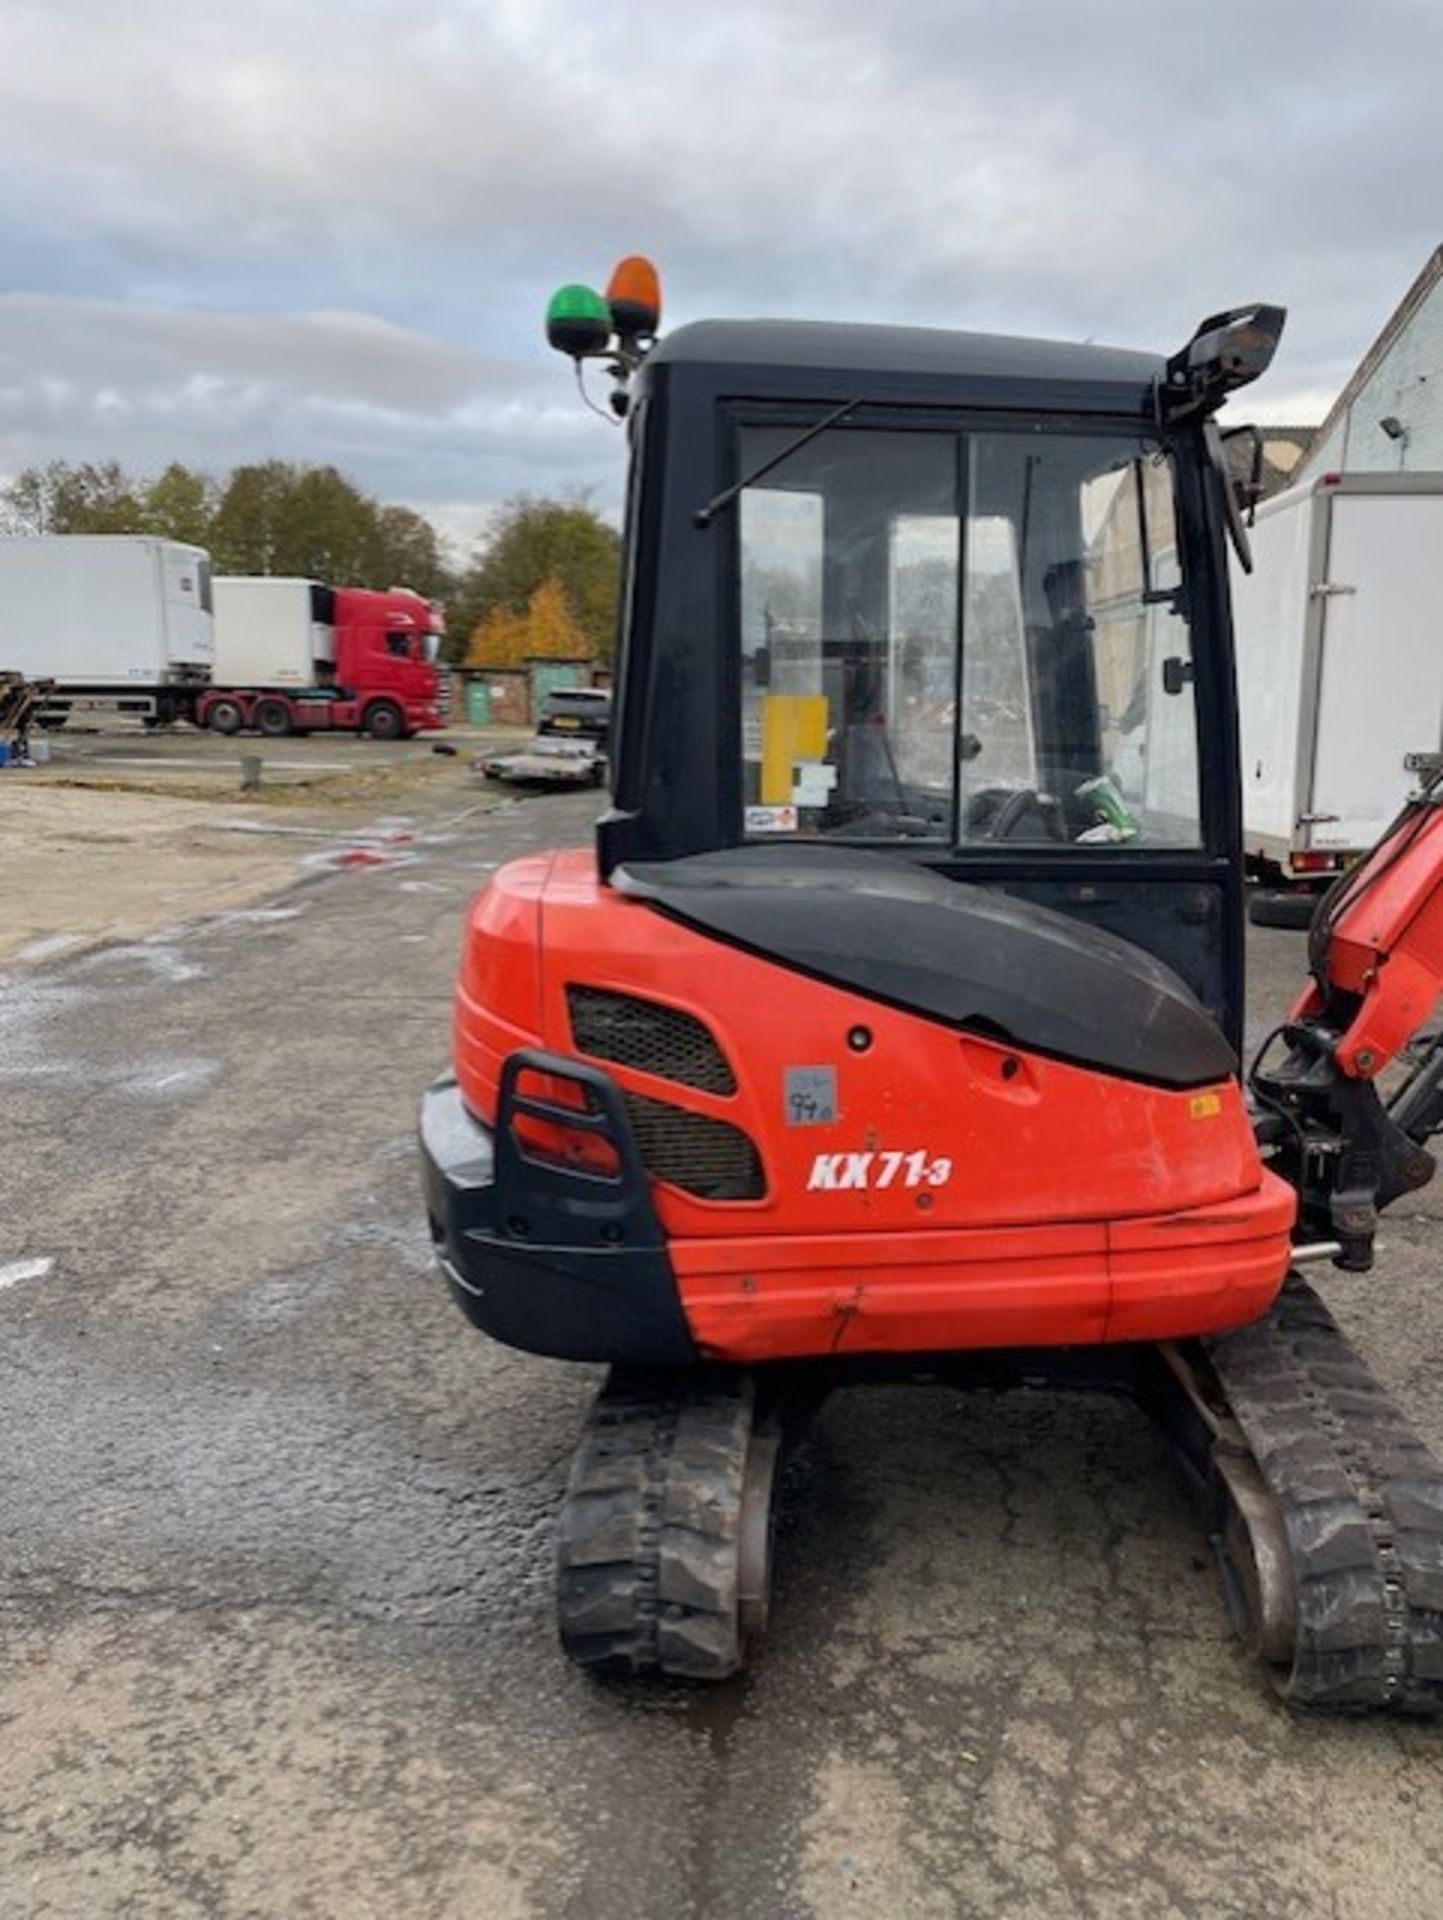 Kubota kx71  3 ton excavator 2015 in very decent condition all working always serviced 3k plus hours - Image 5 of 10